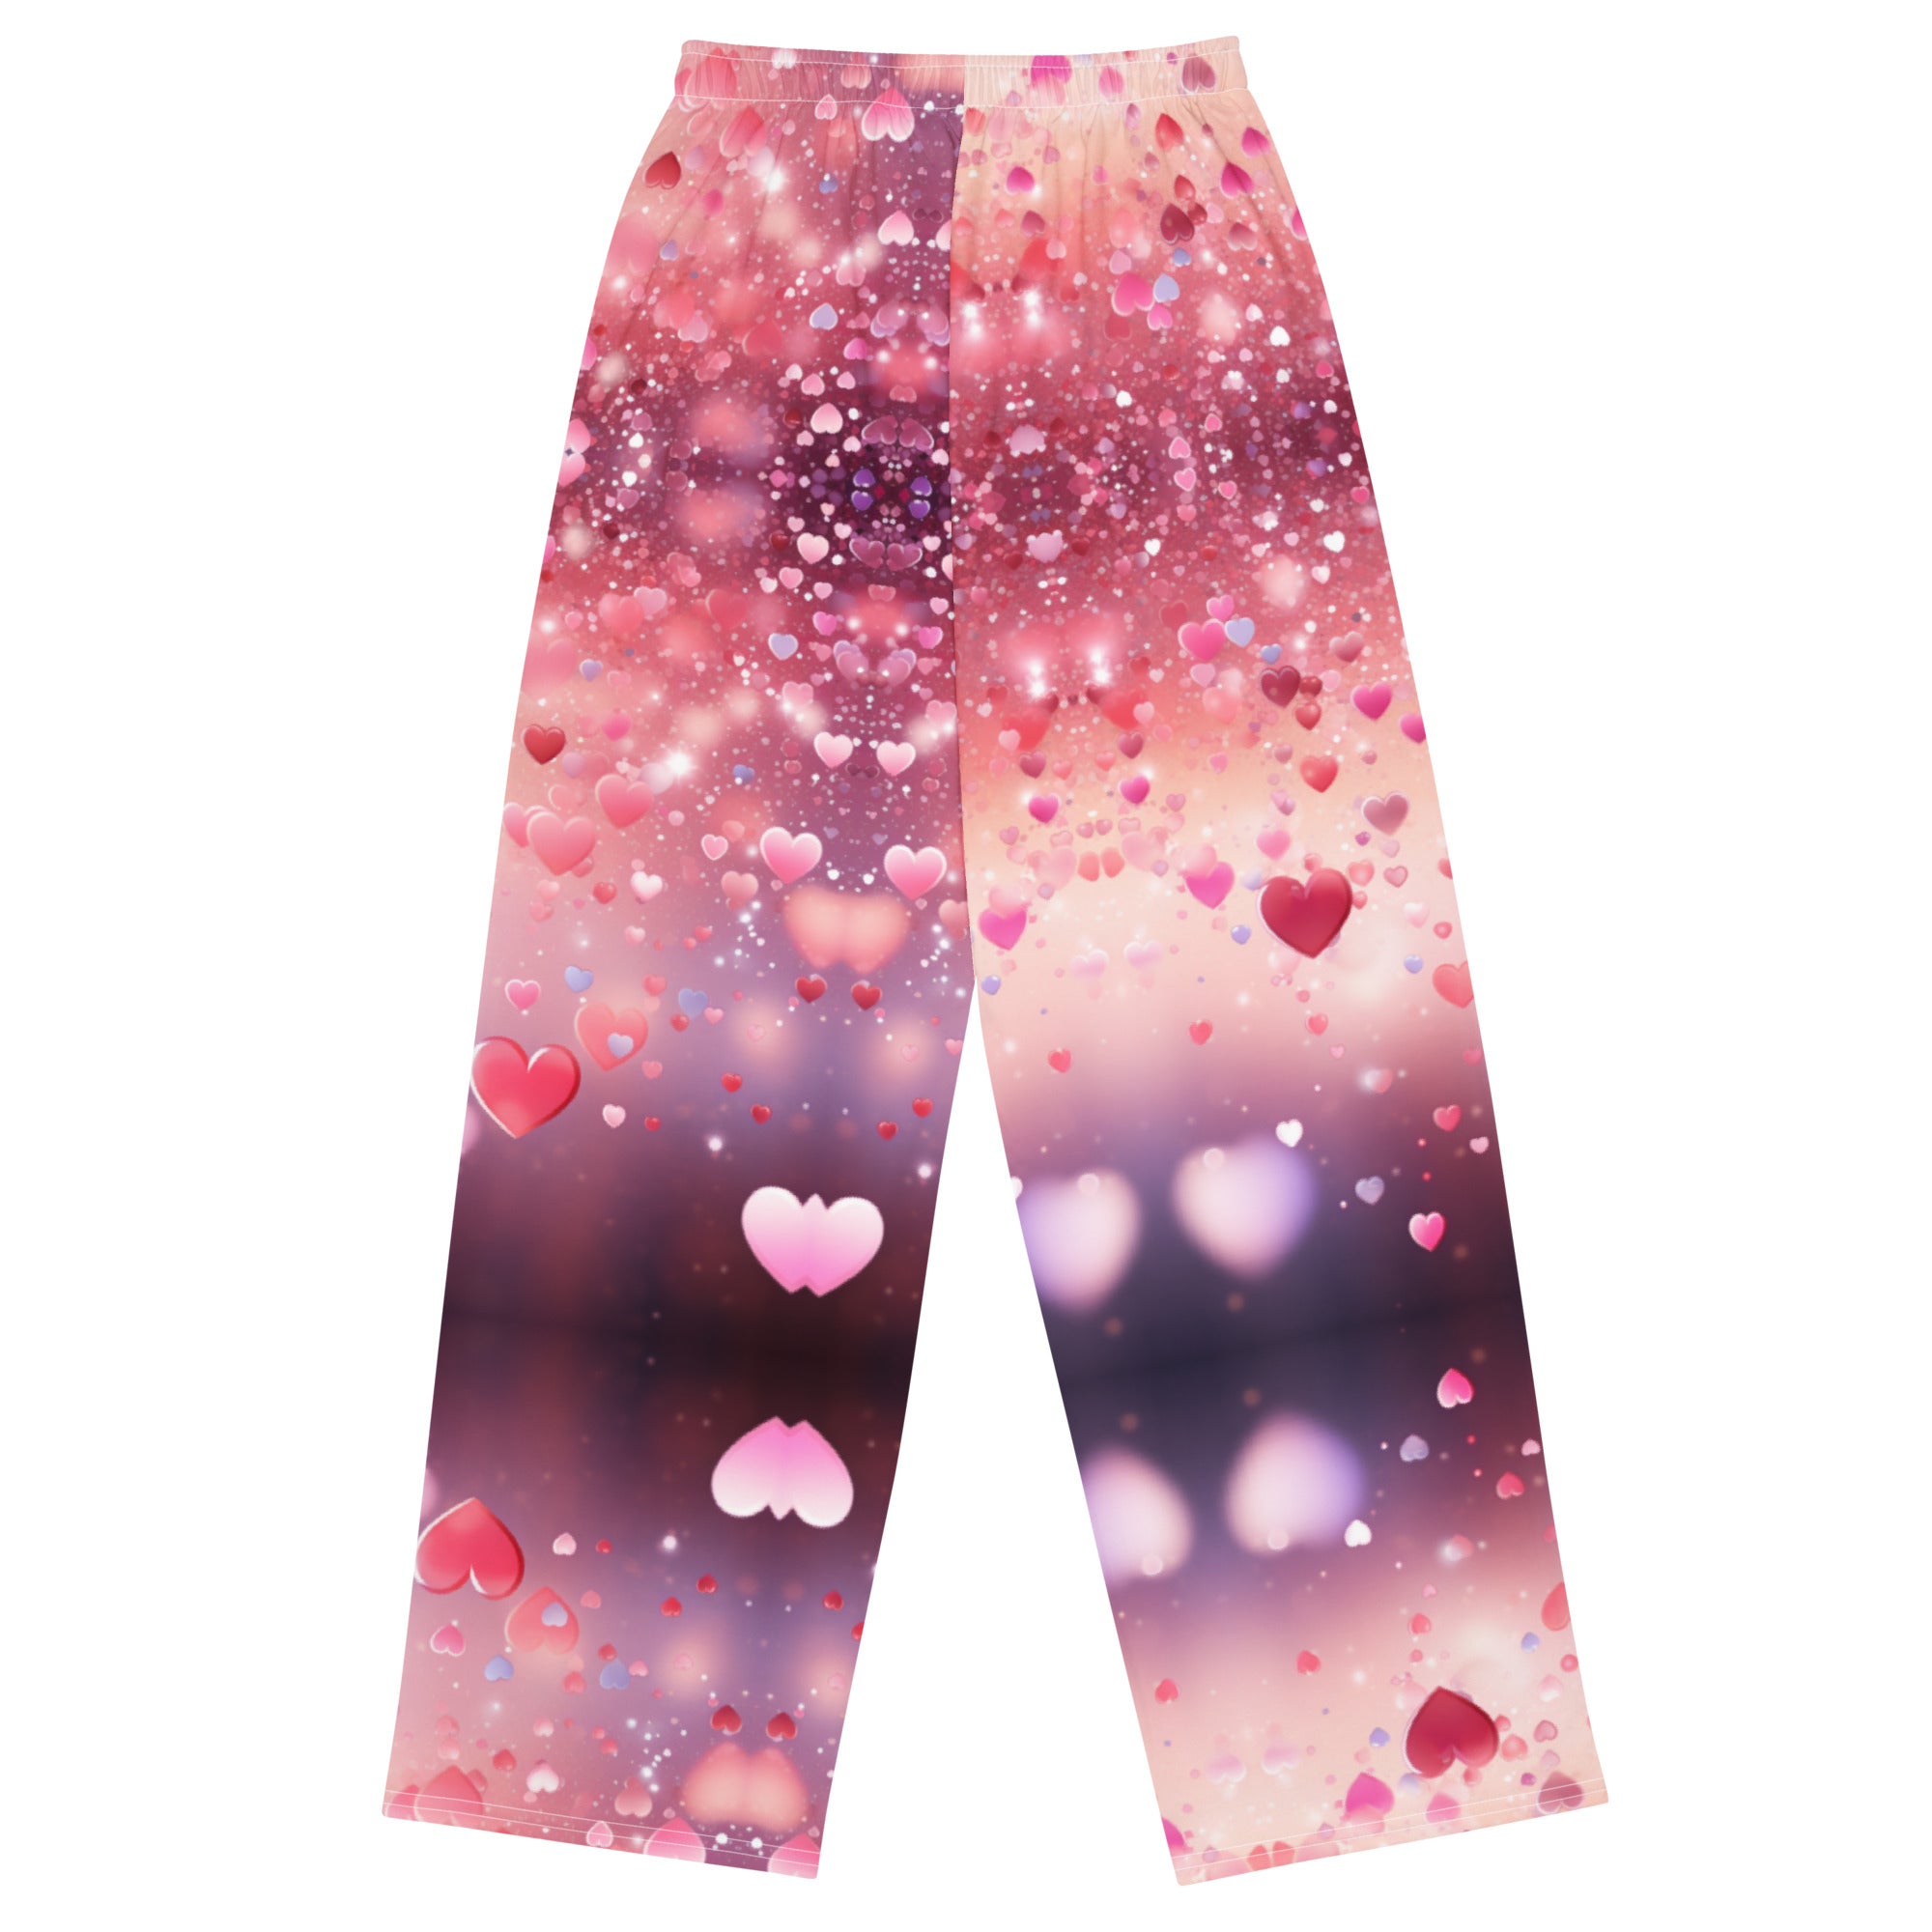 Charming Hearts Wide-Leg Pants: A Perfect Blend of Comfort & Style for Girls and Women - Ideal Valentine's Gift